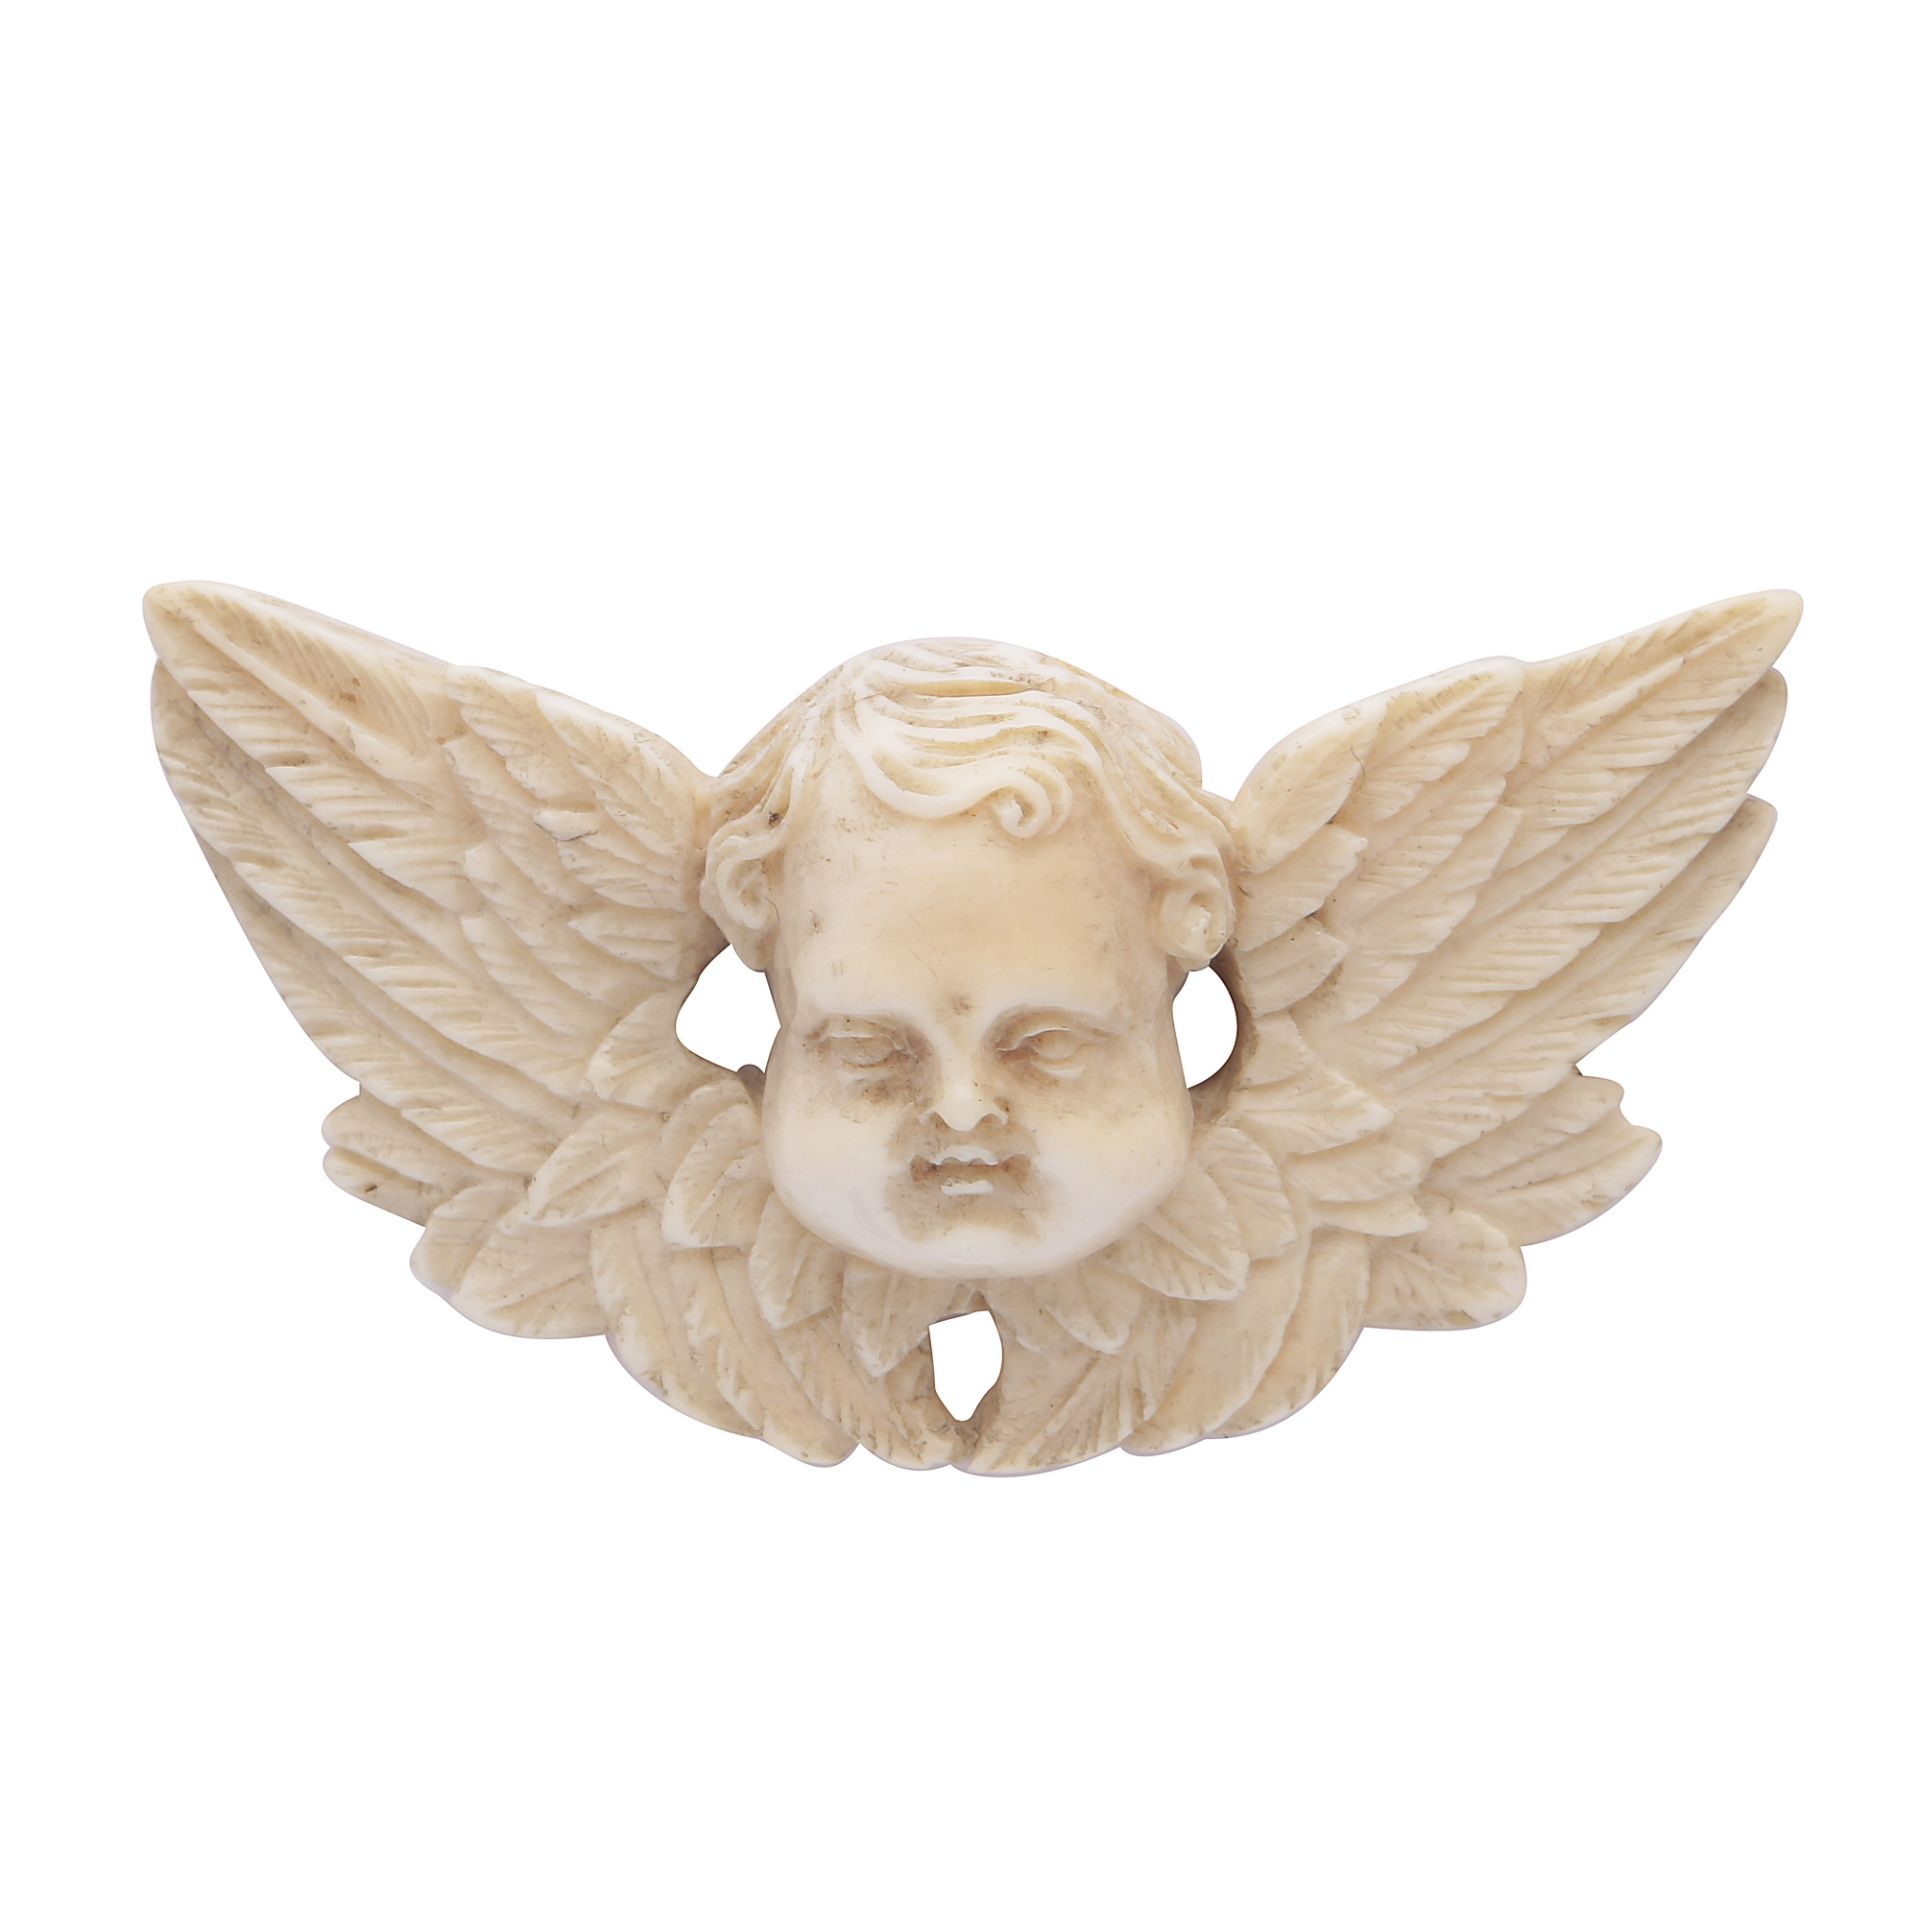 An antique 19th Century carved ivory pendant / choker carved in detail to depict the face of a